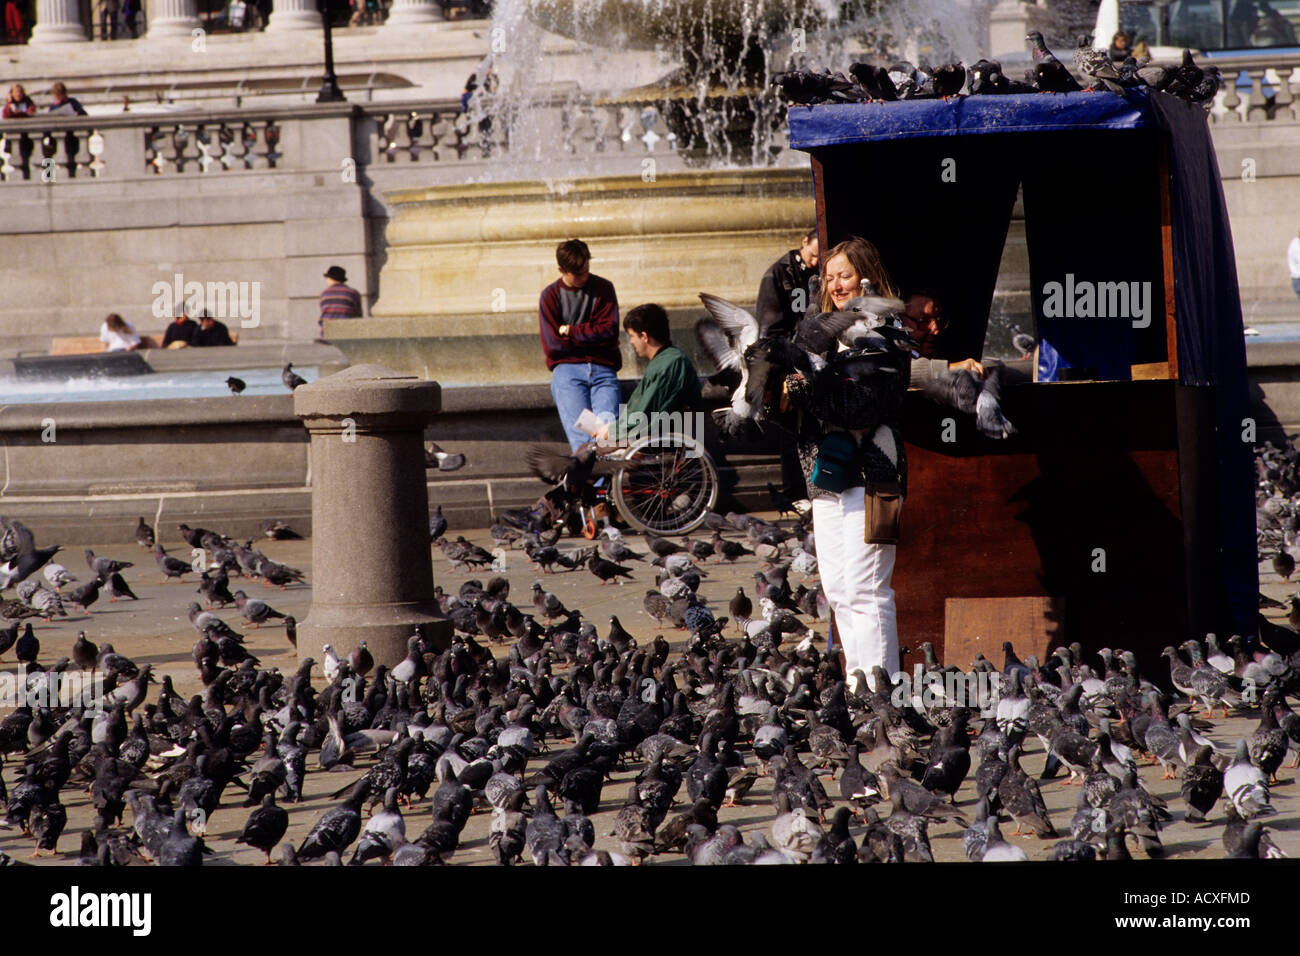 Feeding the pigeons in Trafalgar square in the early 1990's Historic image. Stock Photo